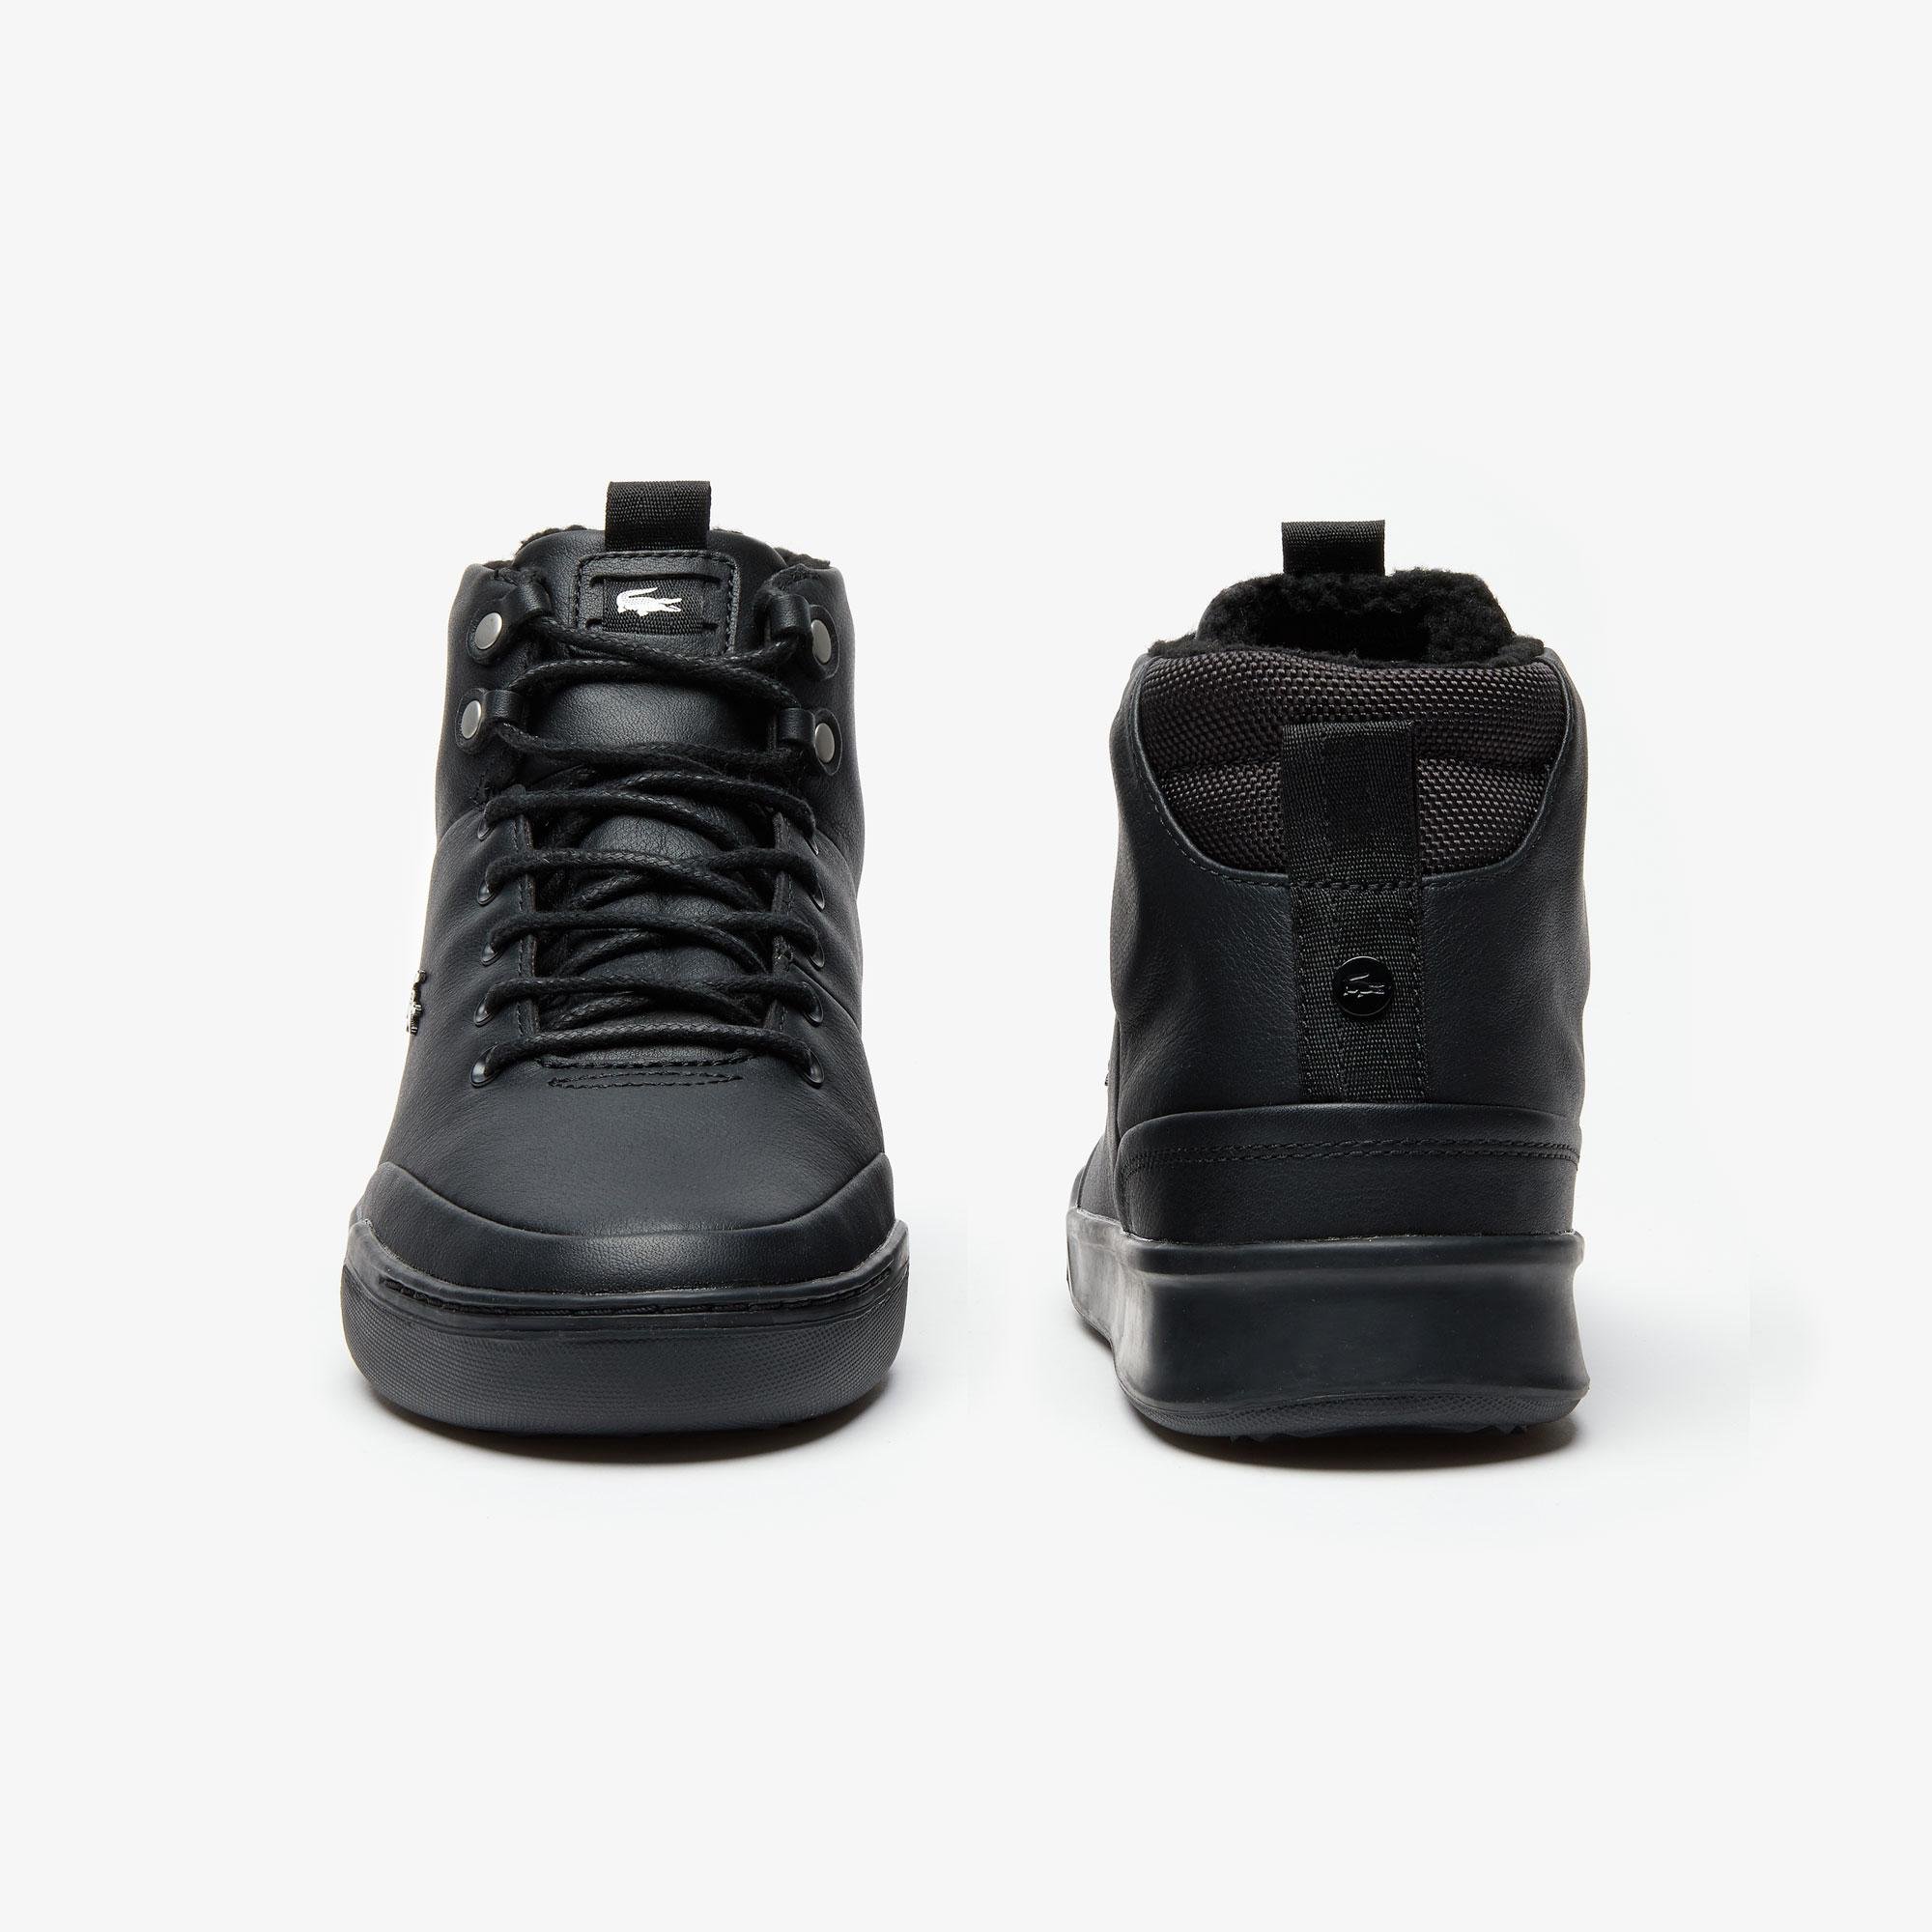 Lacoste Explorateur Thermo 419 1 Męskie Boots